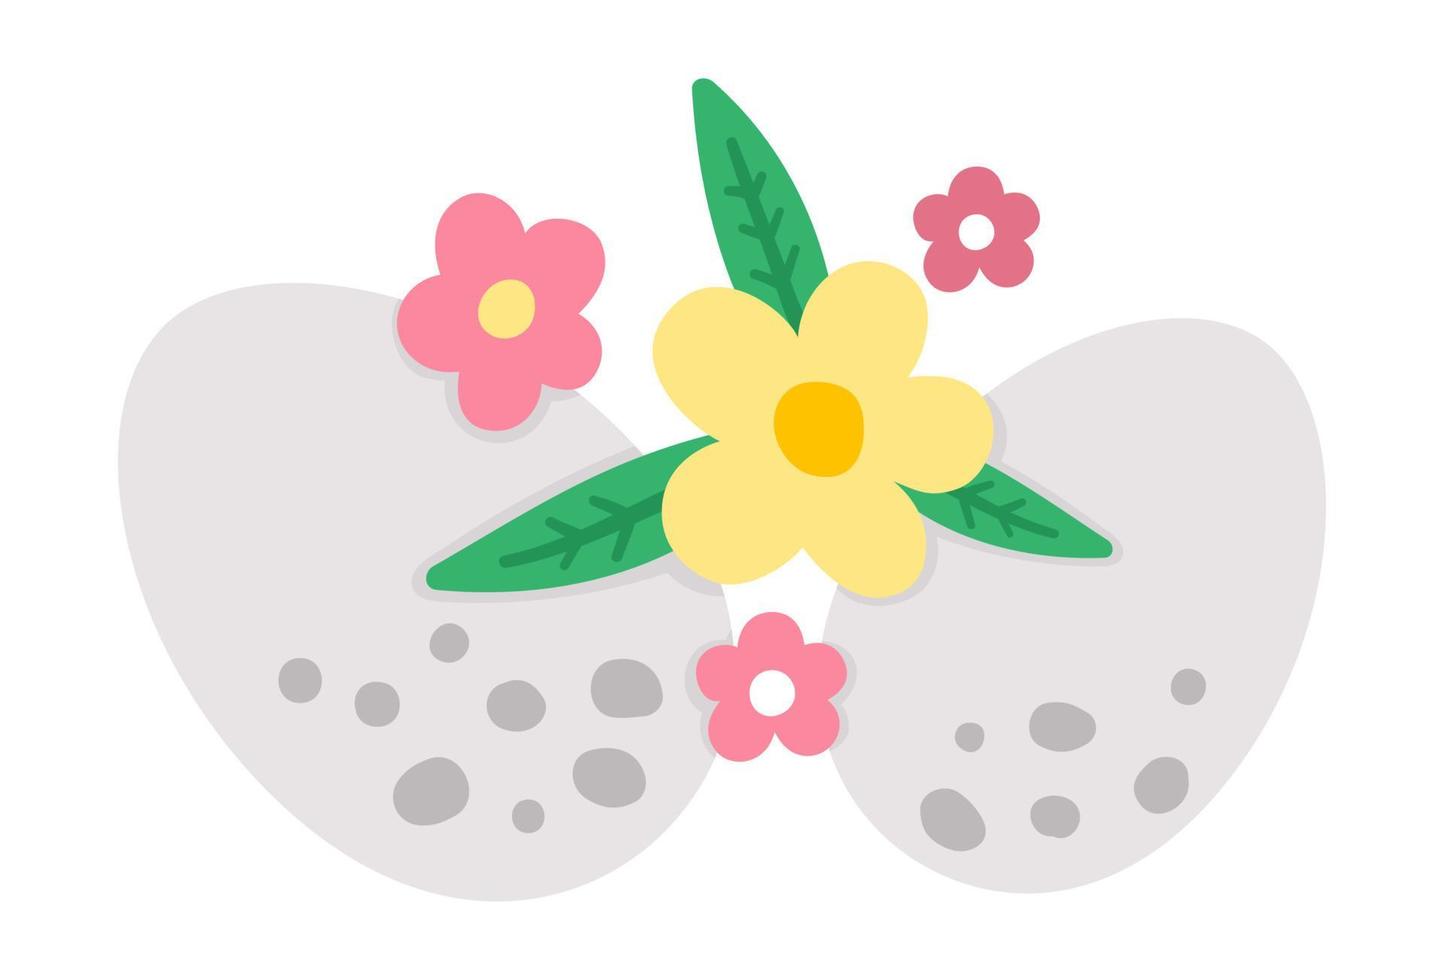 Vector Easter horizontal decorative element. Cute bright composition with eggs, plants and leaves. Spring icon. Holiday floral design with first flowers and colored eggs.